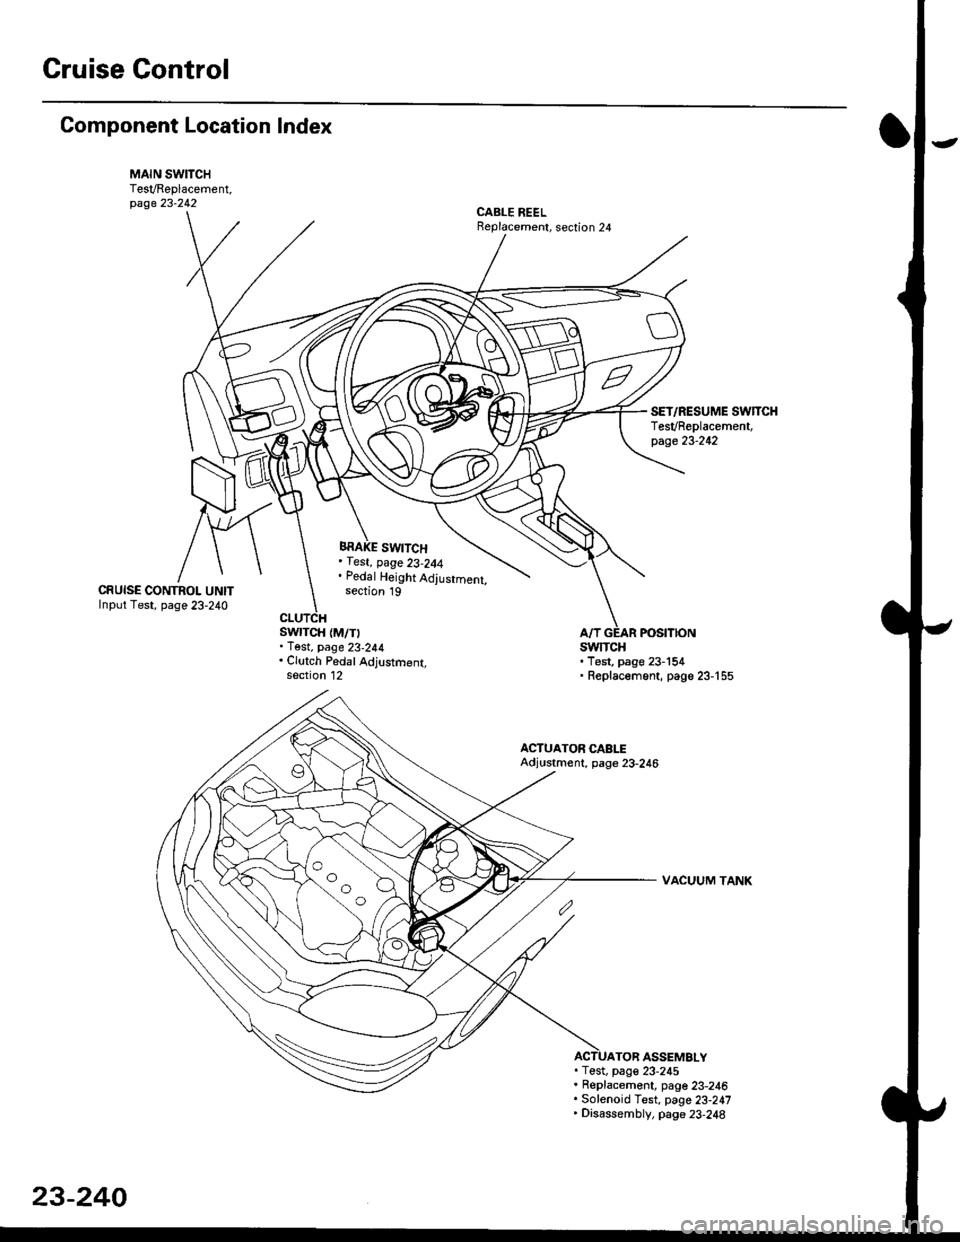 HONDA CIVIC 1998 6.G Workshop Manual Gruise Control
Component Location Index
MAIN SWITCHTesVReplacement,page 23-242CABLE REELReplacement, section 24
BRAKE SWITCH, fest, page 23-244. Pedal Height Adjustment,section 19CRUISE CONTROI. UNITI